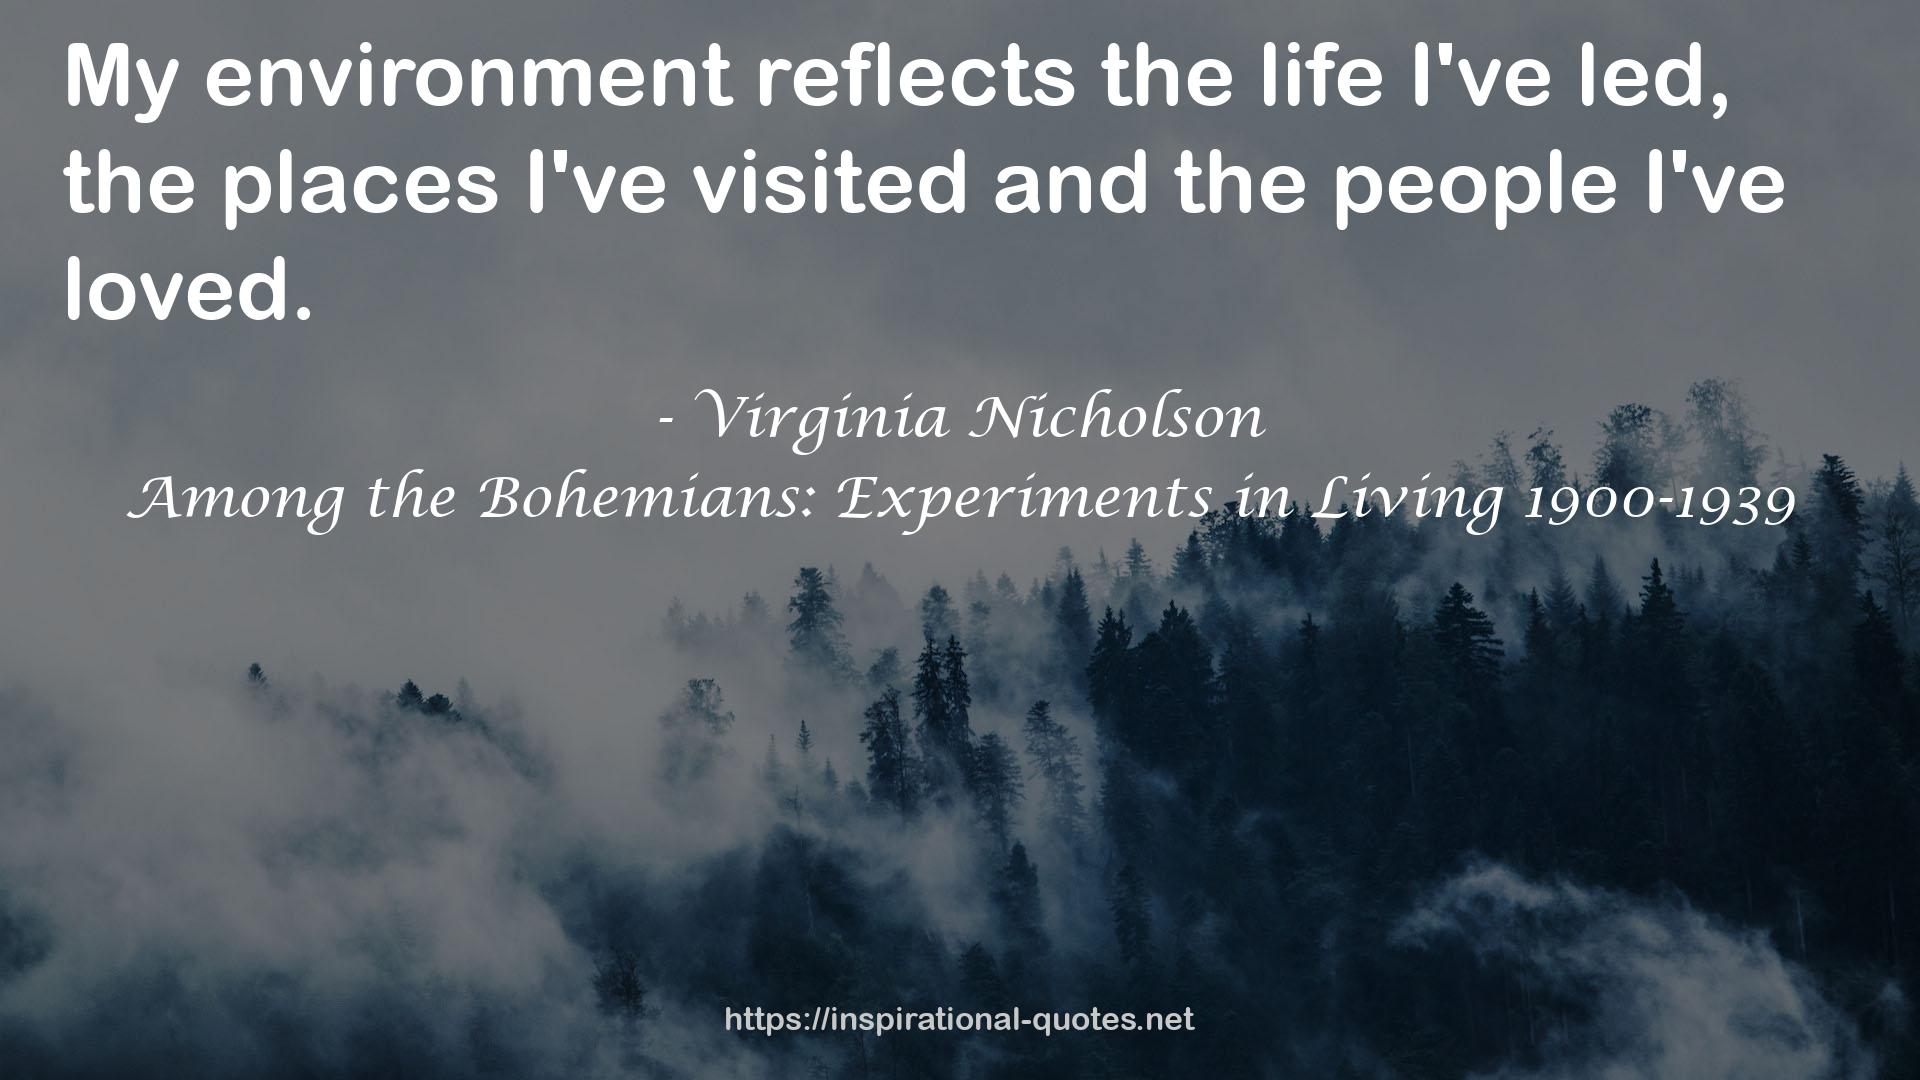 Among the Bohemians: Experiments in Living 1900-1939 QUOTES